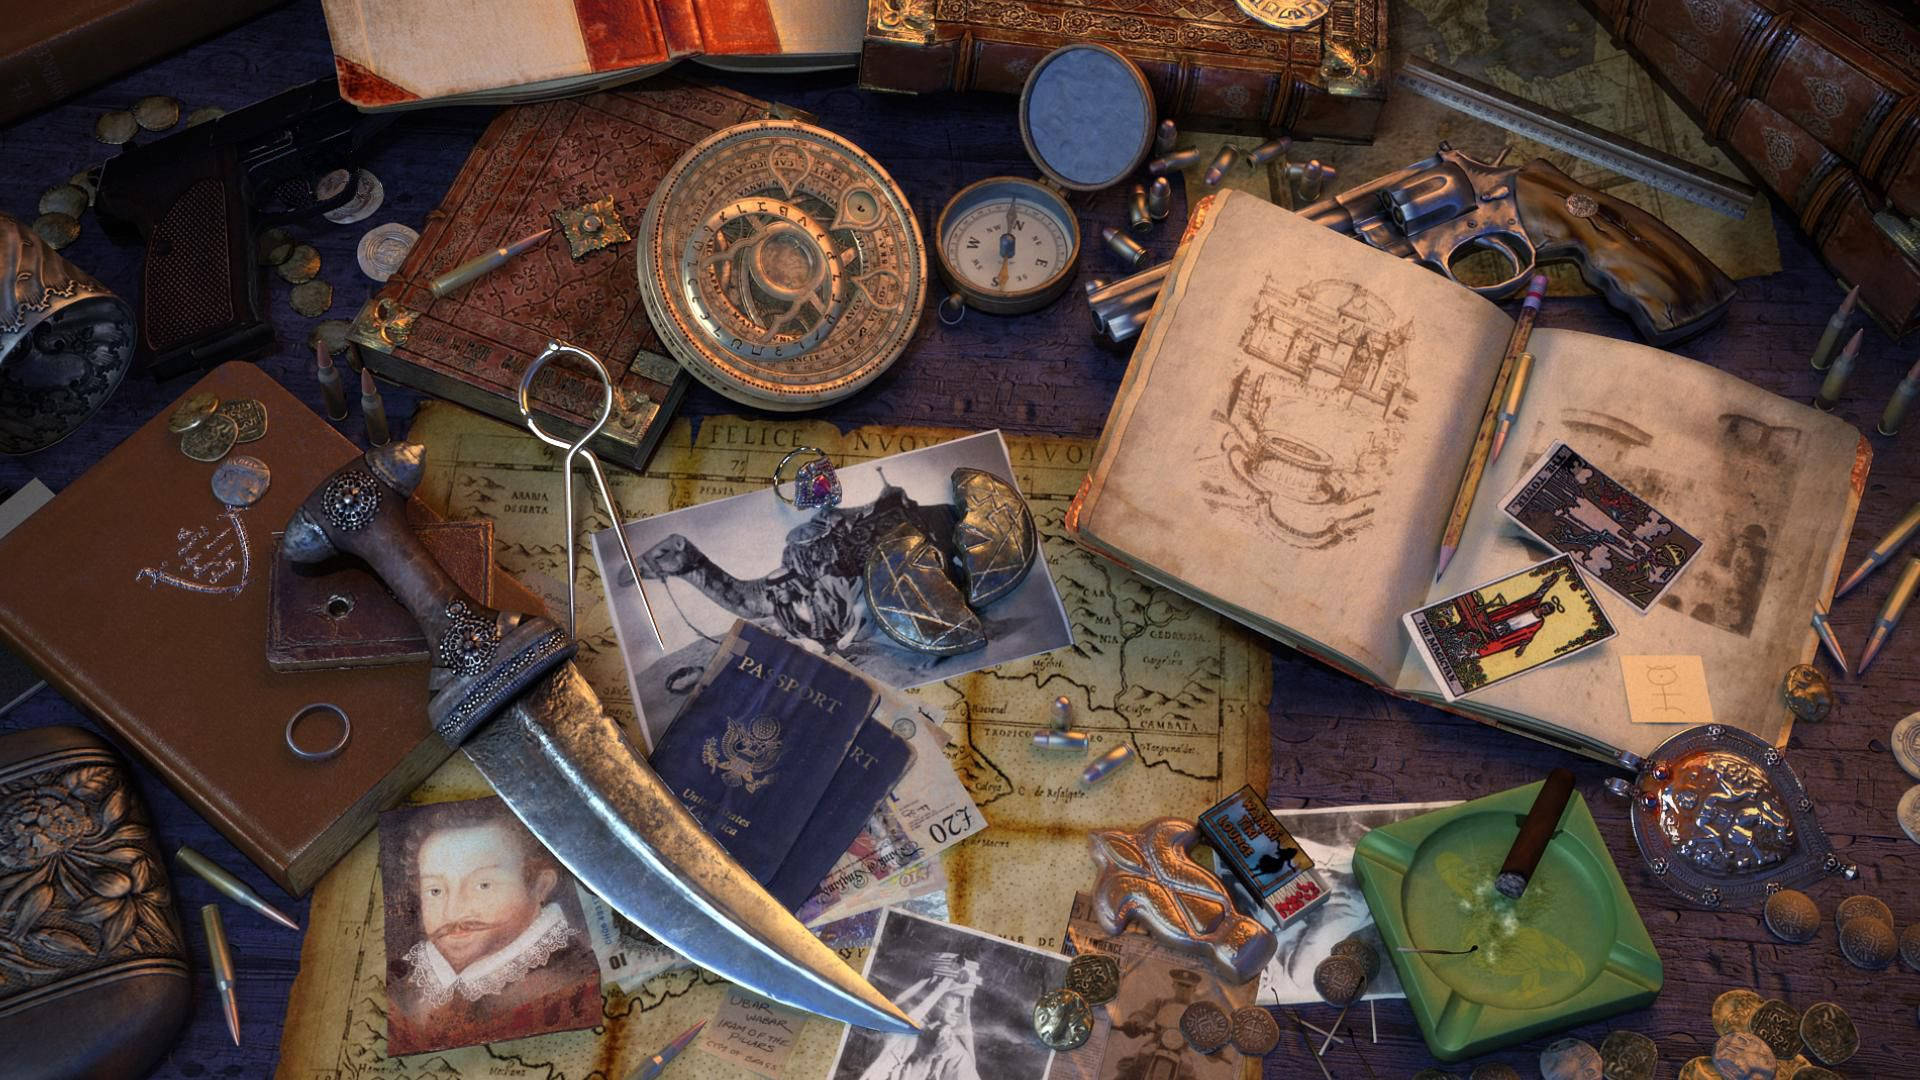 Uncharted Game Books And Artefacts Background